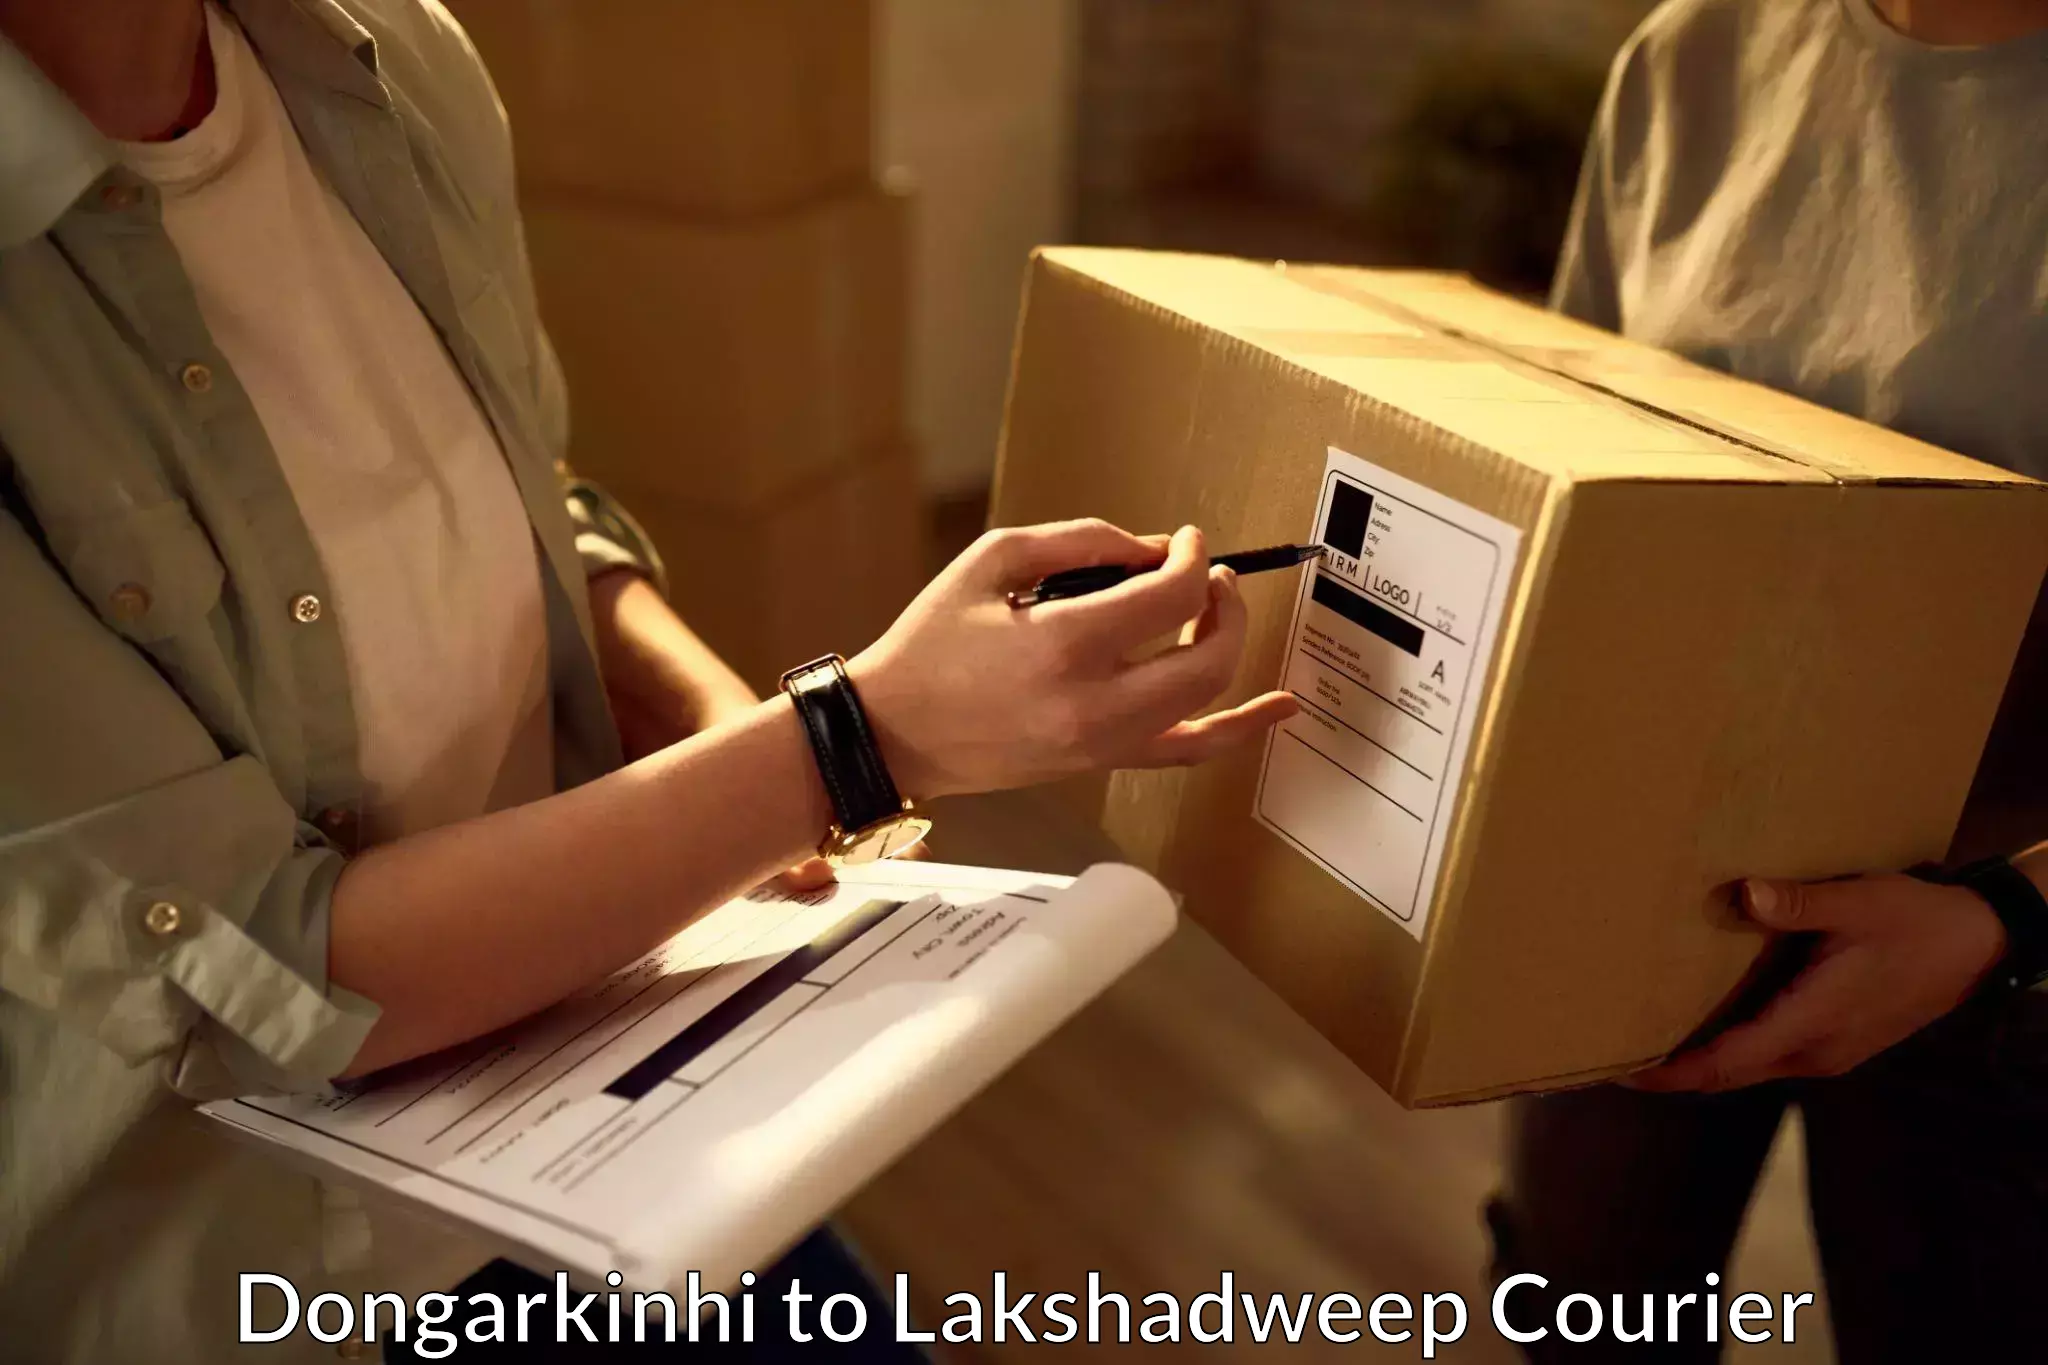 Cargo courier service Dongarkinhi to Lakshadweep